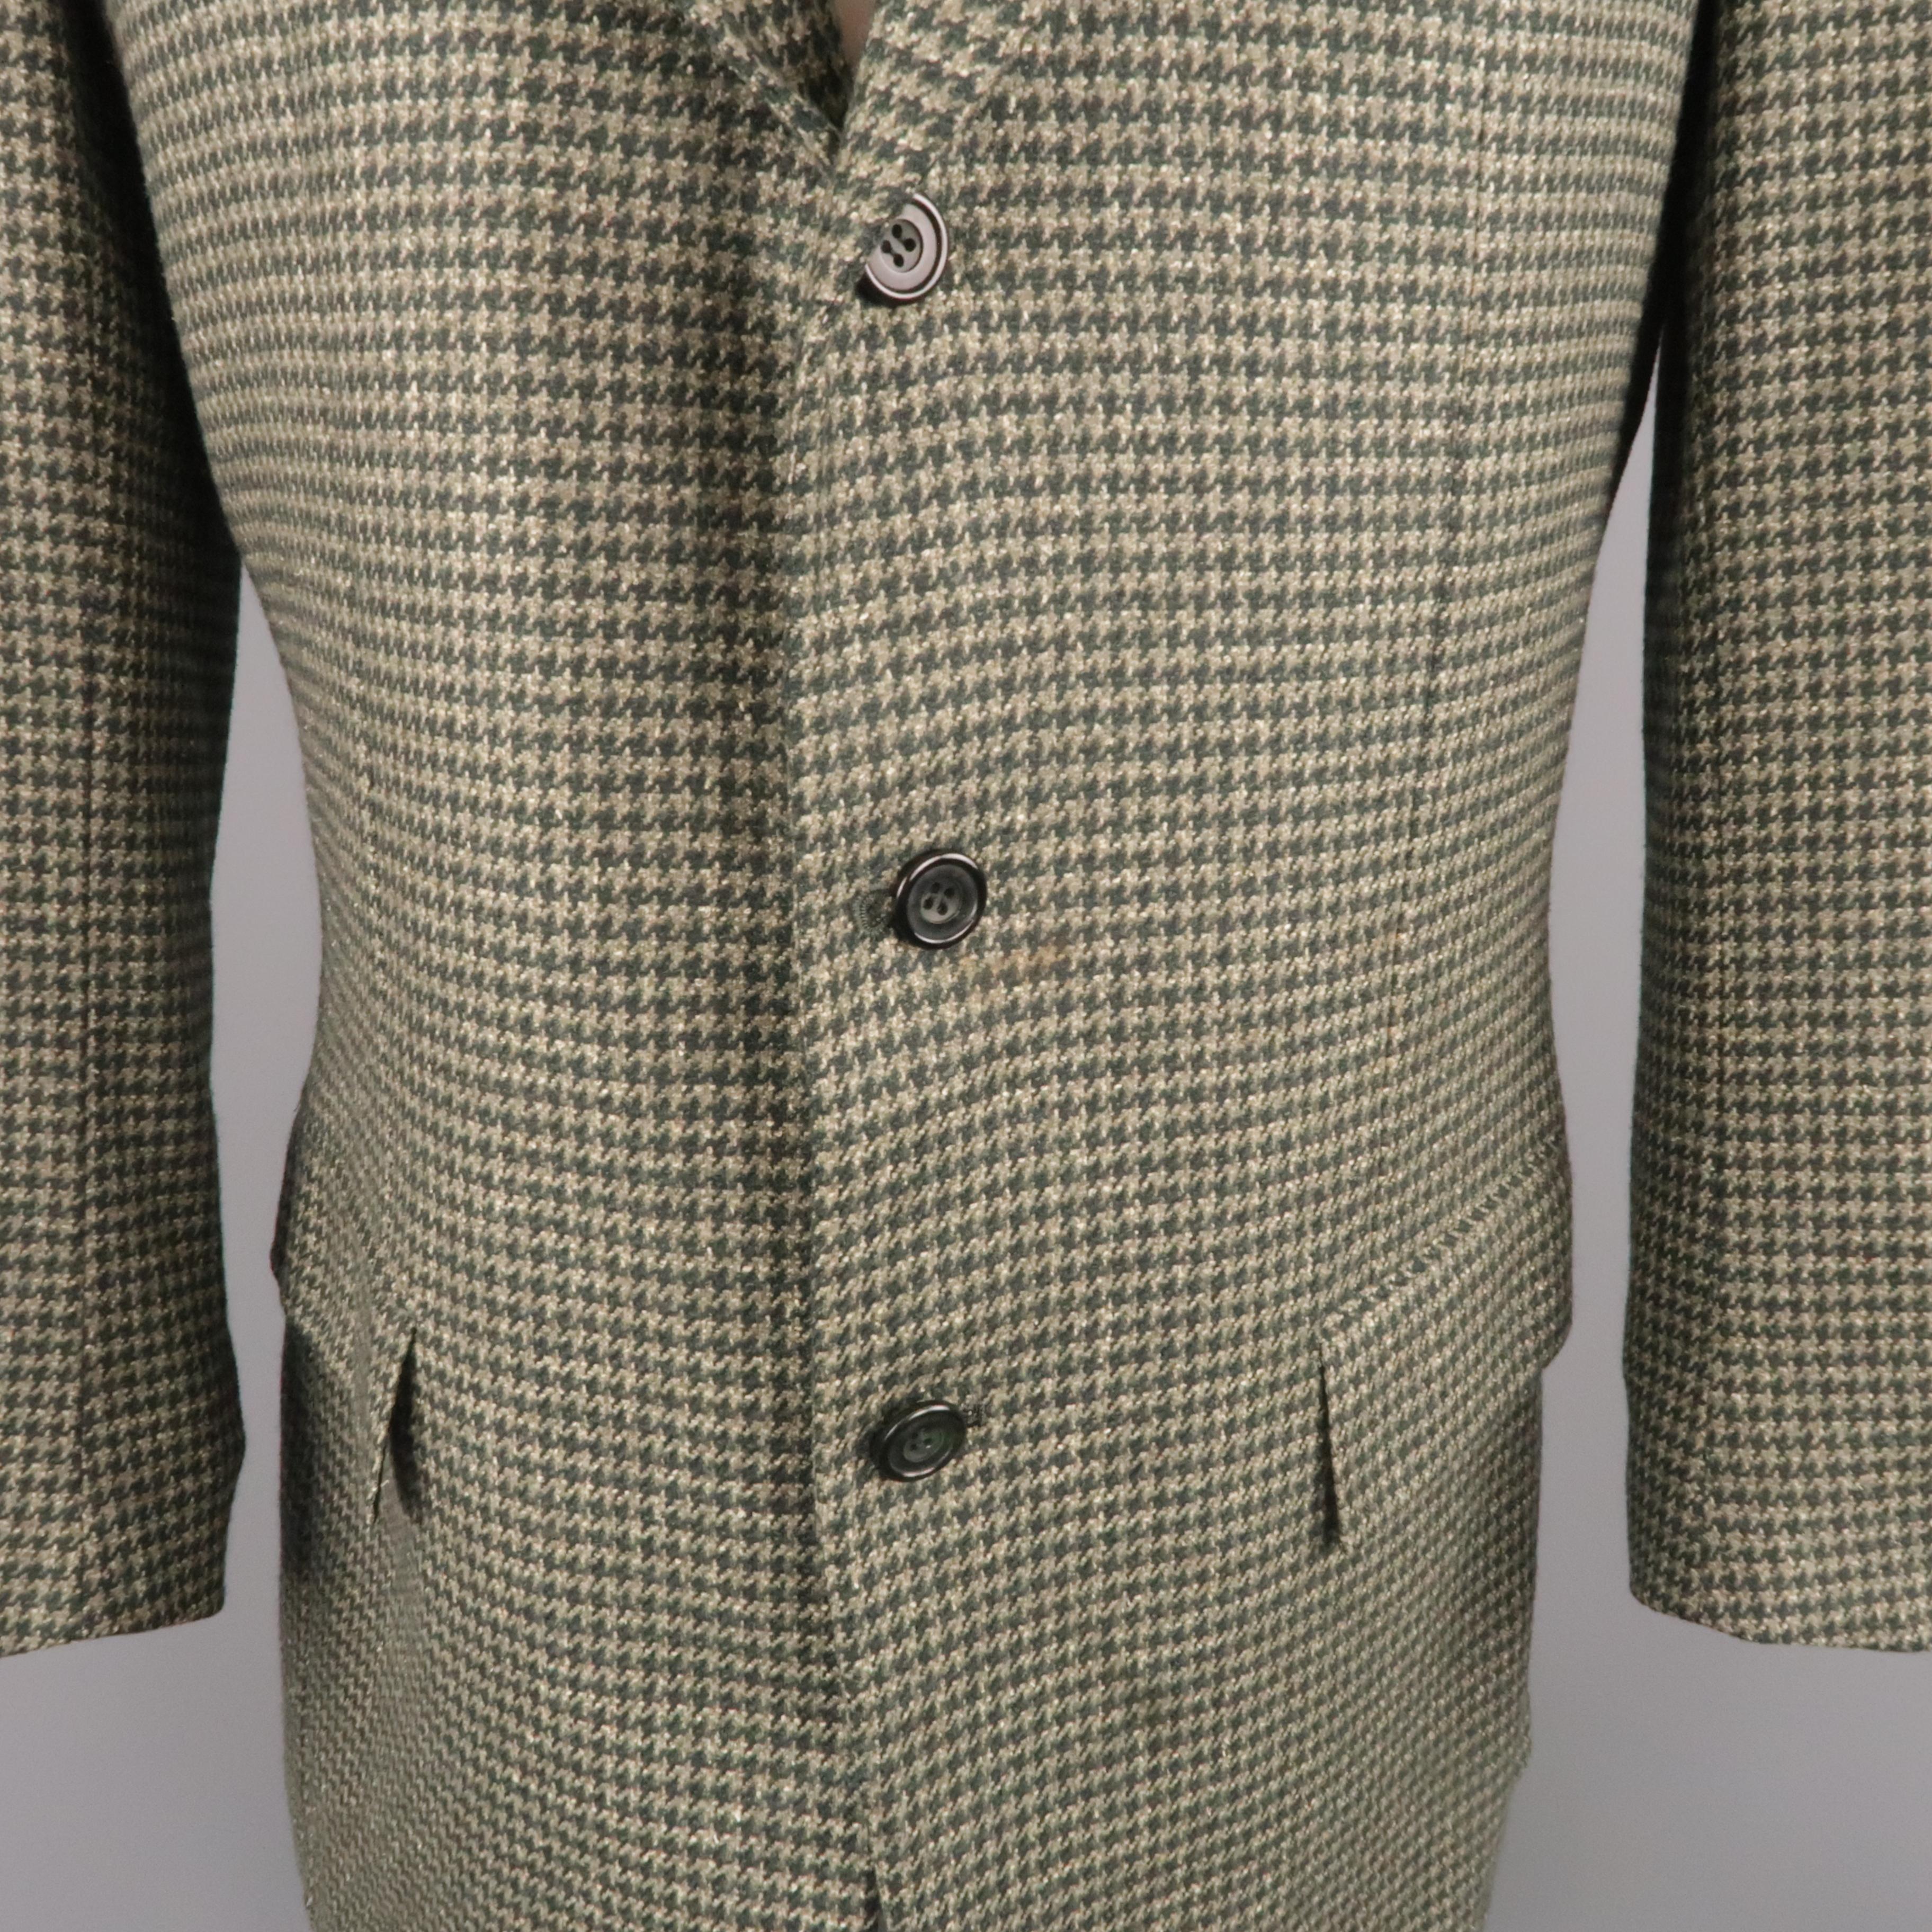 Vintage KITON sport coat comes in green houndstooth cashmere with a notch lapel, single breasted,  three button front, silk lining, and functional button cuffs. Spot on front. As-is. Made in Italy.
 
Good Pre-Owned Condition.
Marked: IT 50
